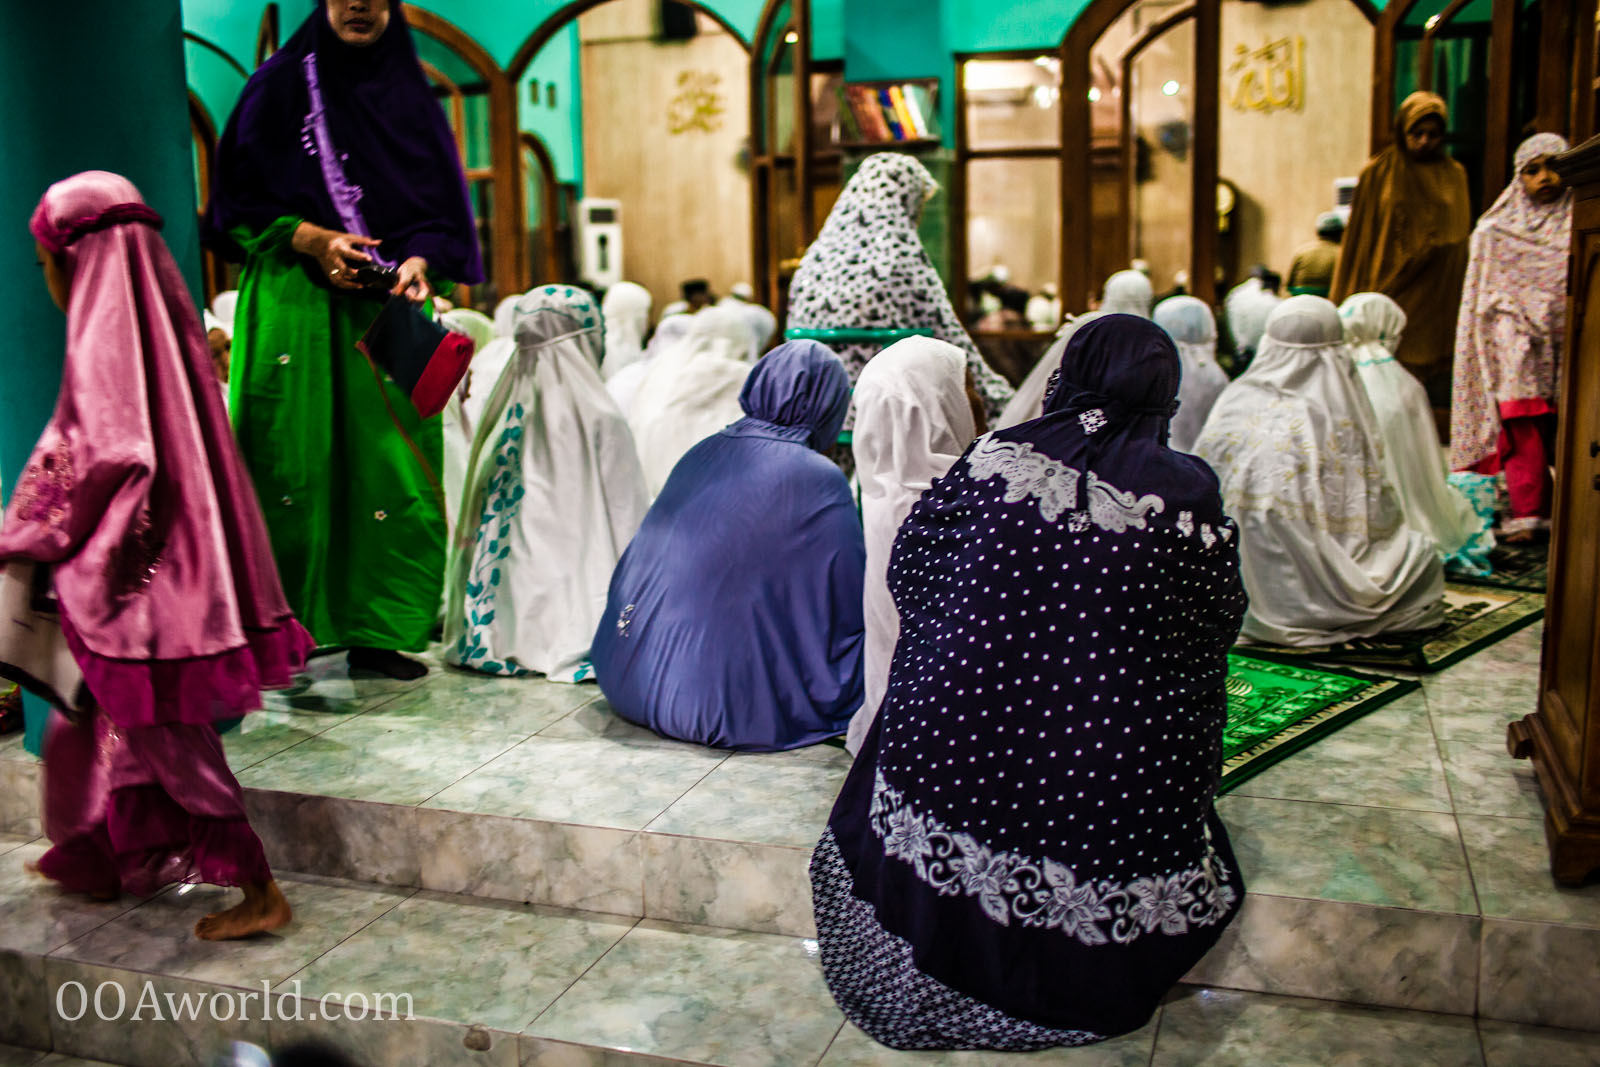 Photo Generations of Women at the Mosque Ooaworld